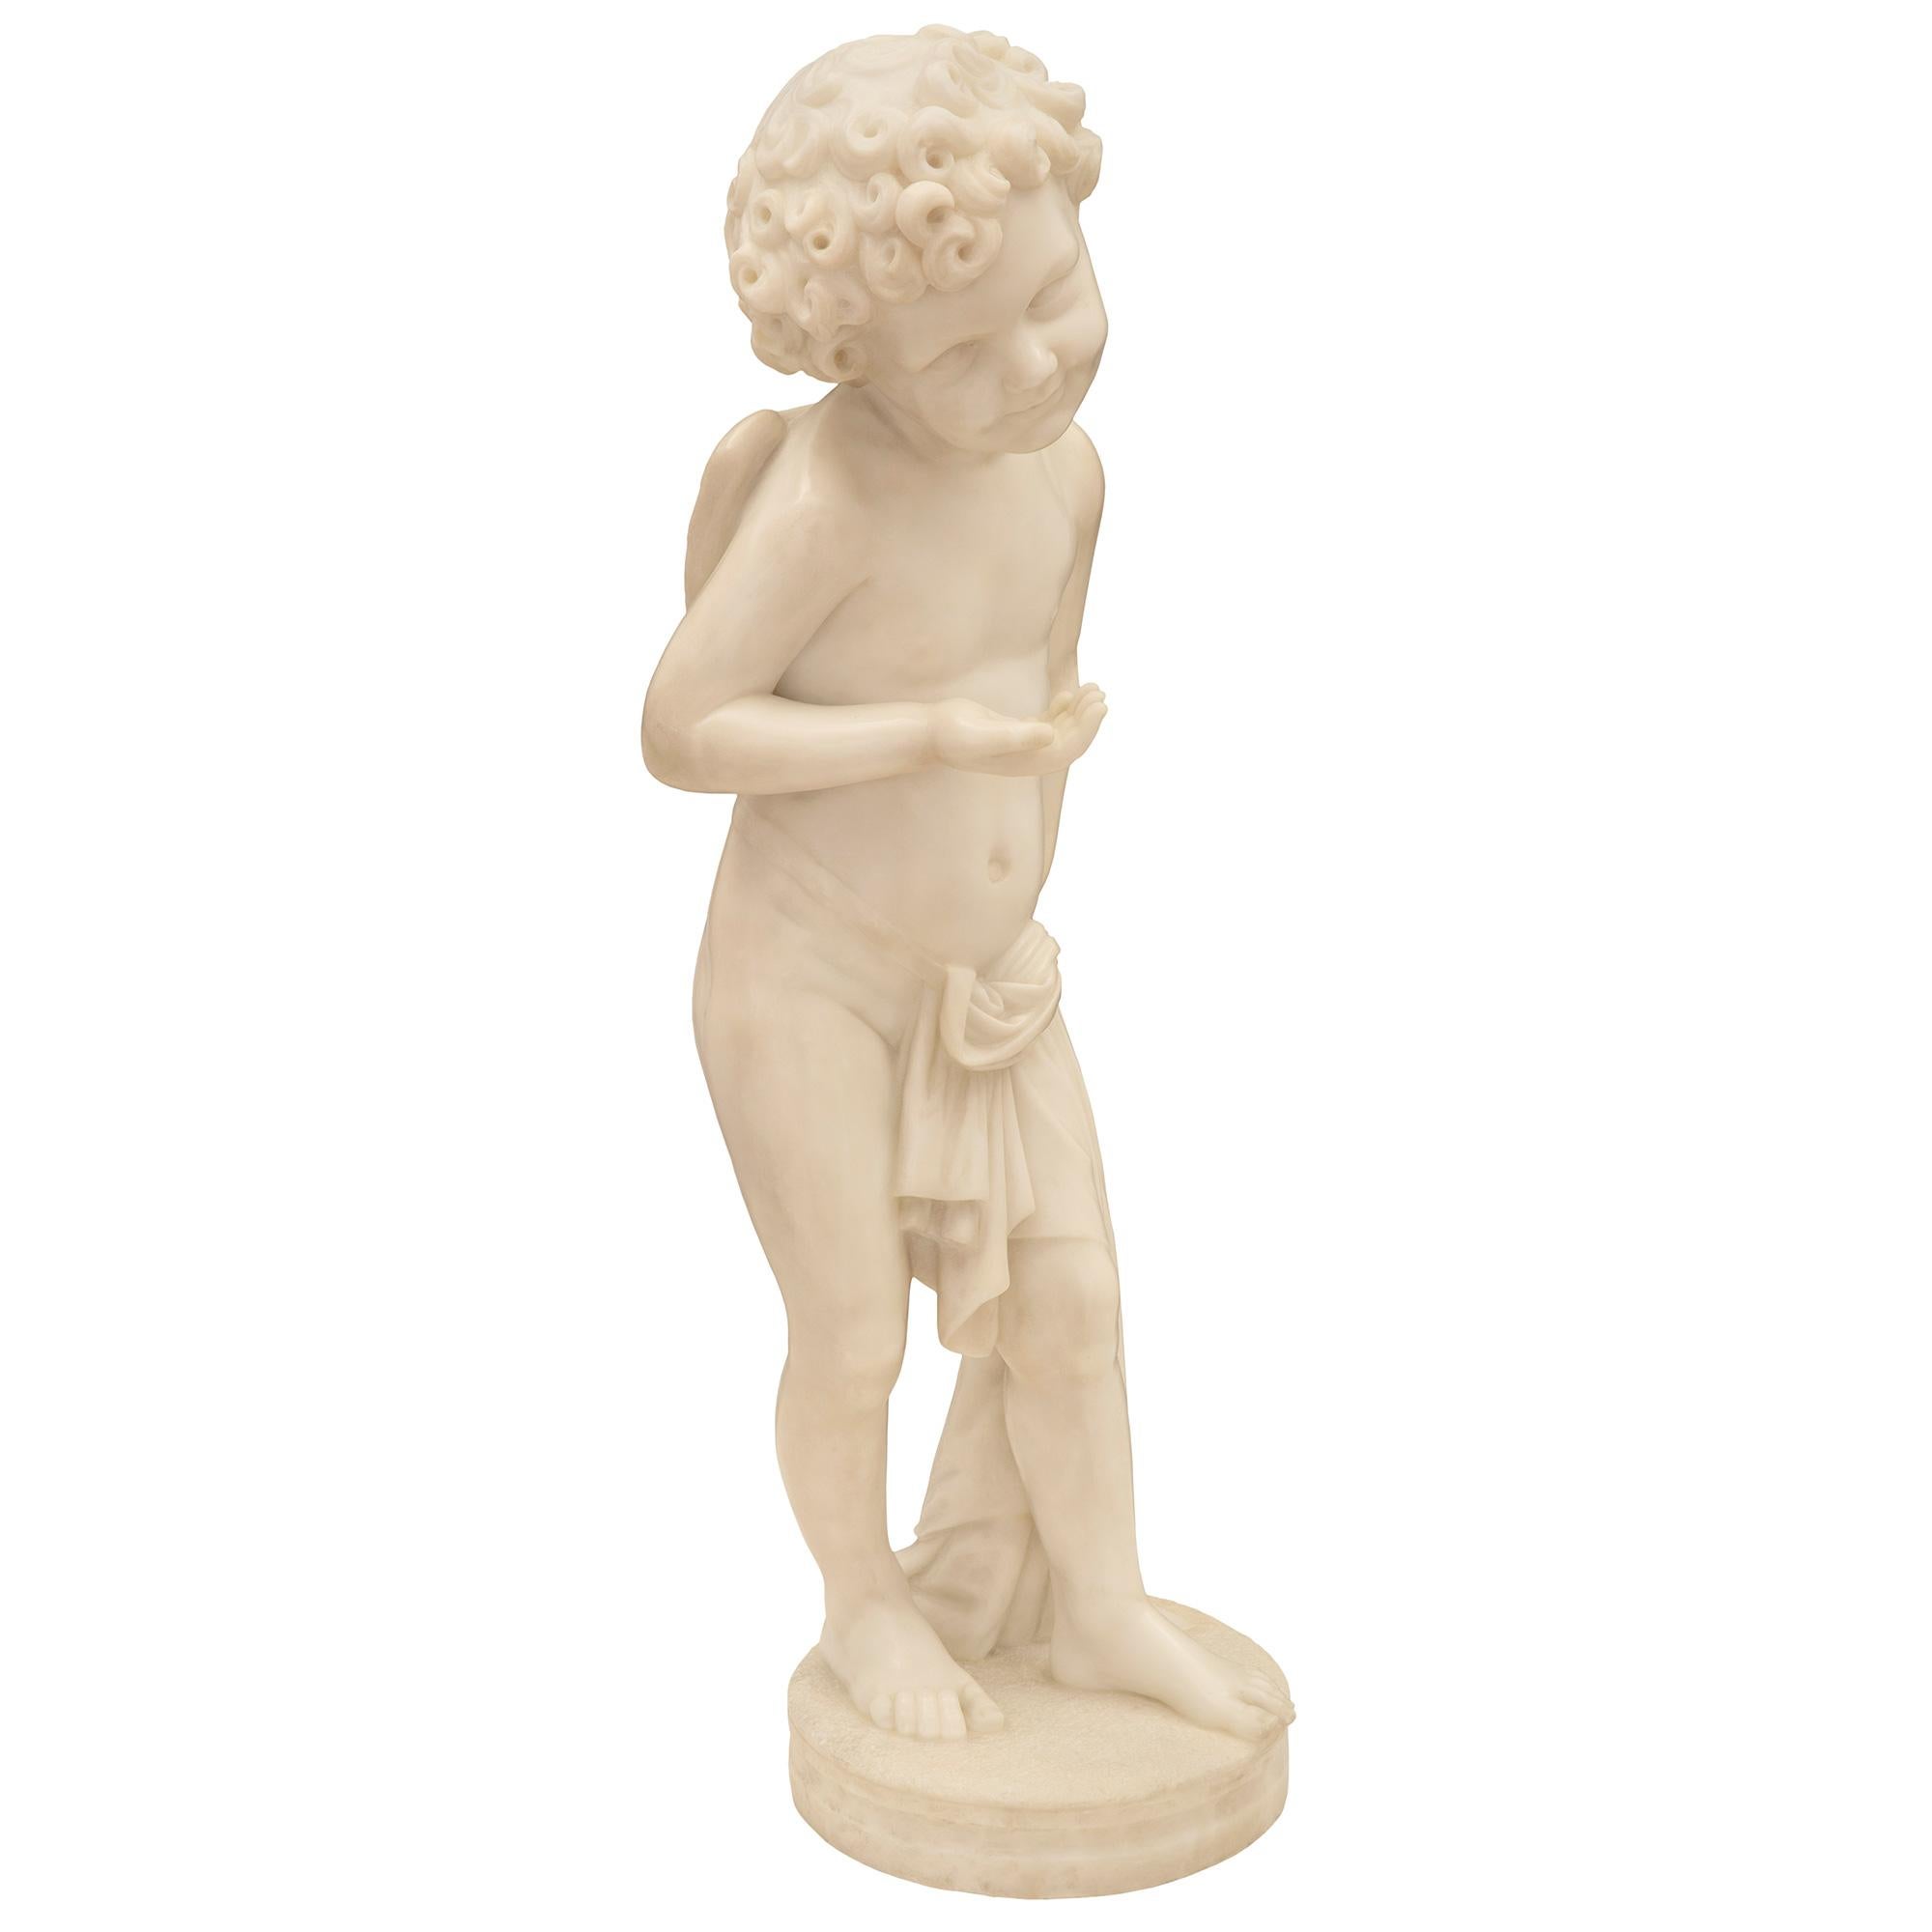 A most charming and finely detailed Italian 19th century white Carrara marble statue of young cupid. The statue is raised by a circular base with a fine wrap around mottled design. The wonderfully executed cupid is draped in a beautiful flowing